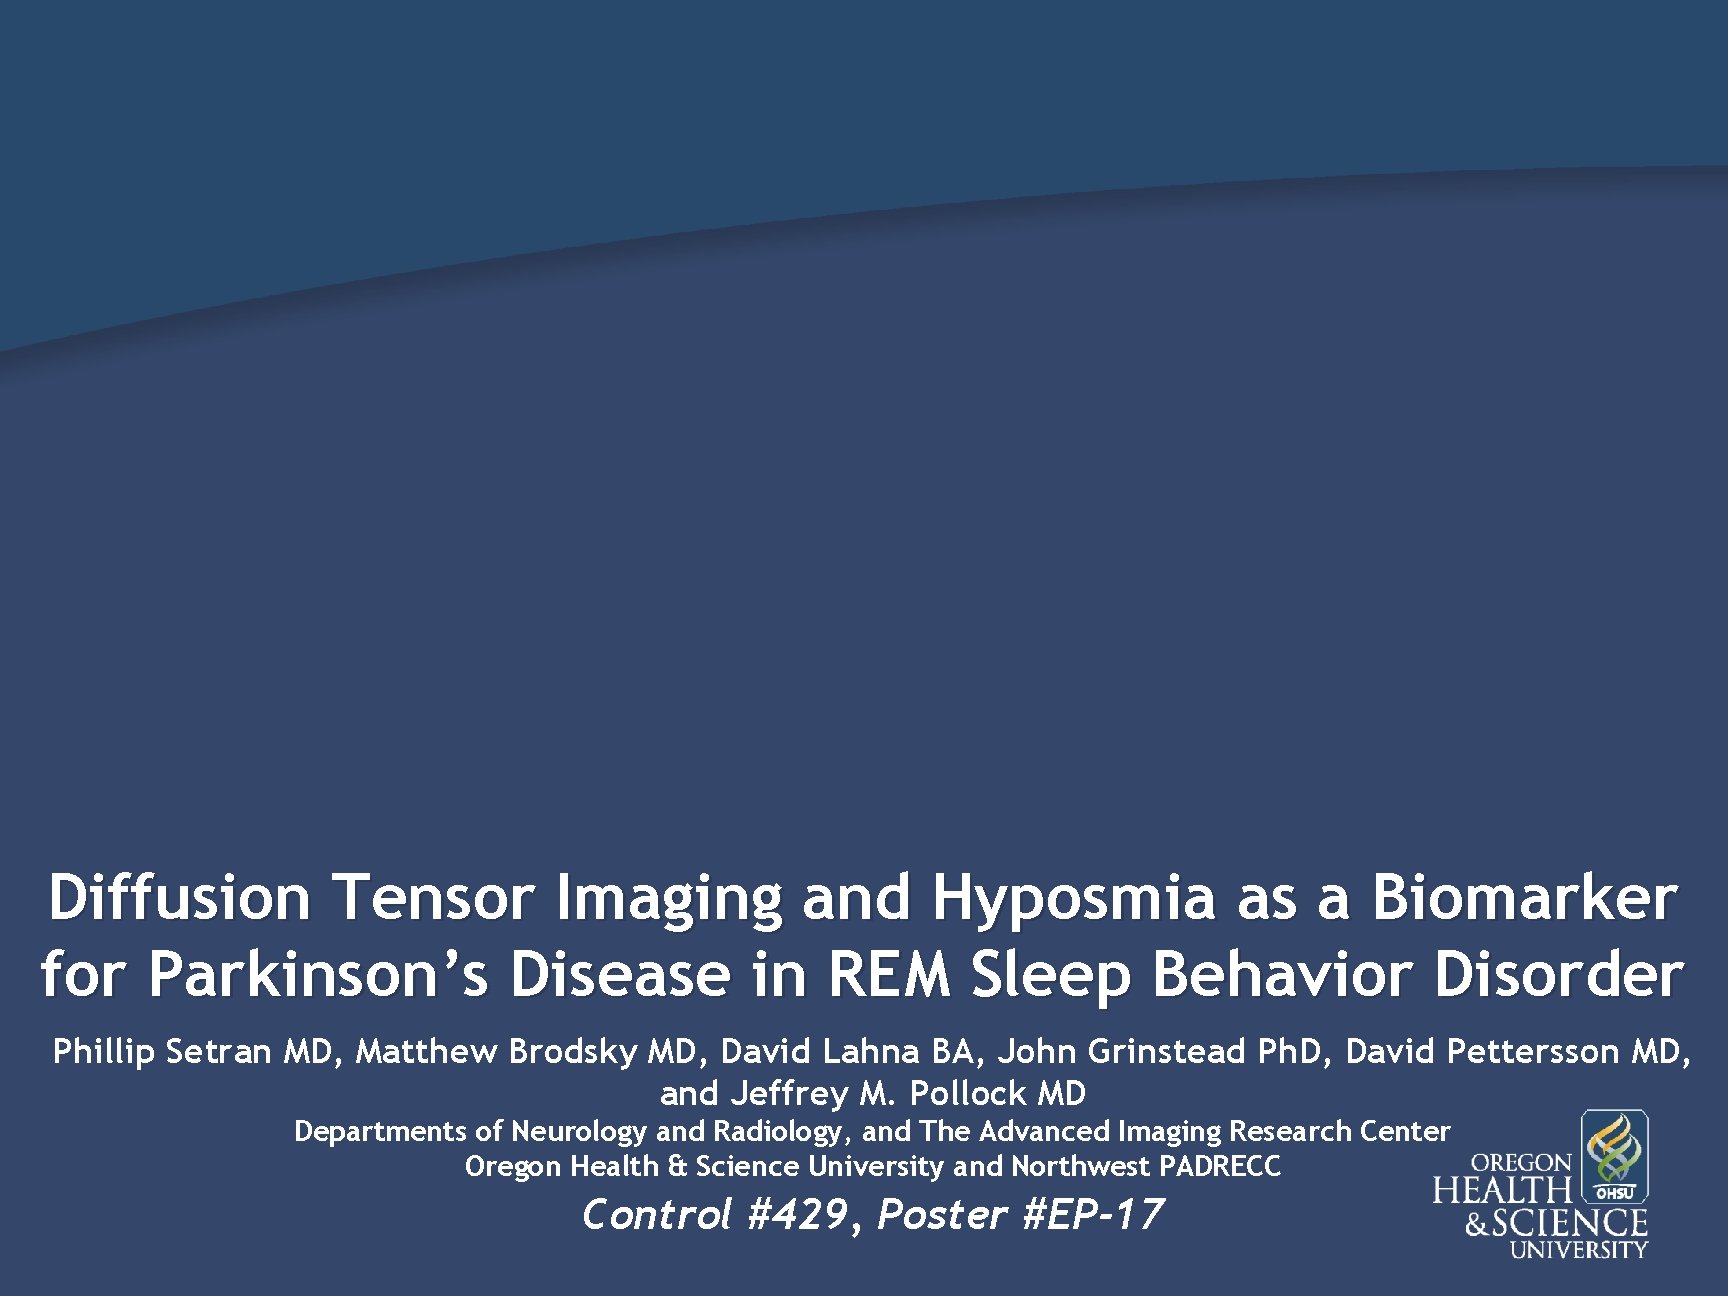 Diffusion Tensor Imaging and Hyposmia as a Biomarker for Parkinson’s Disease in REM Sleep